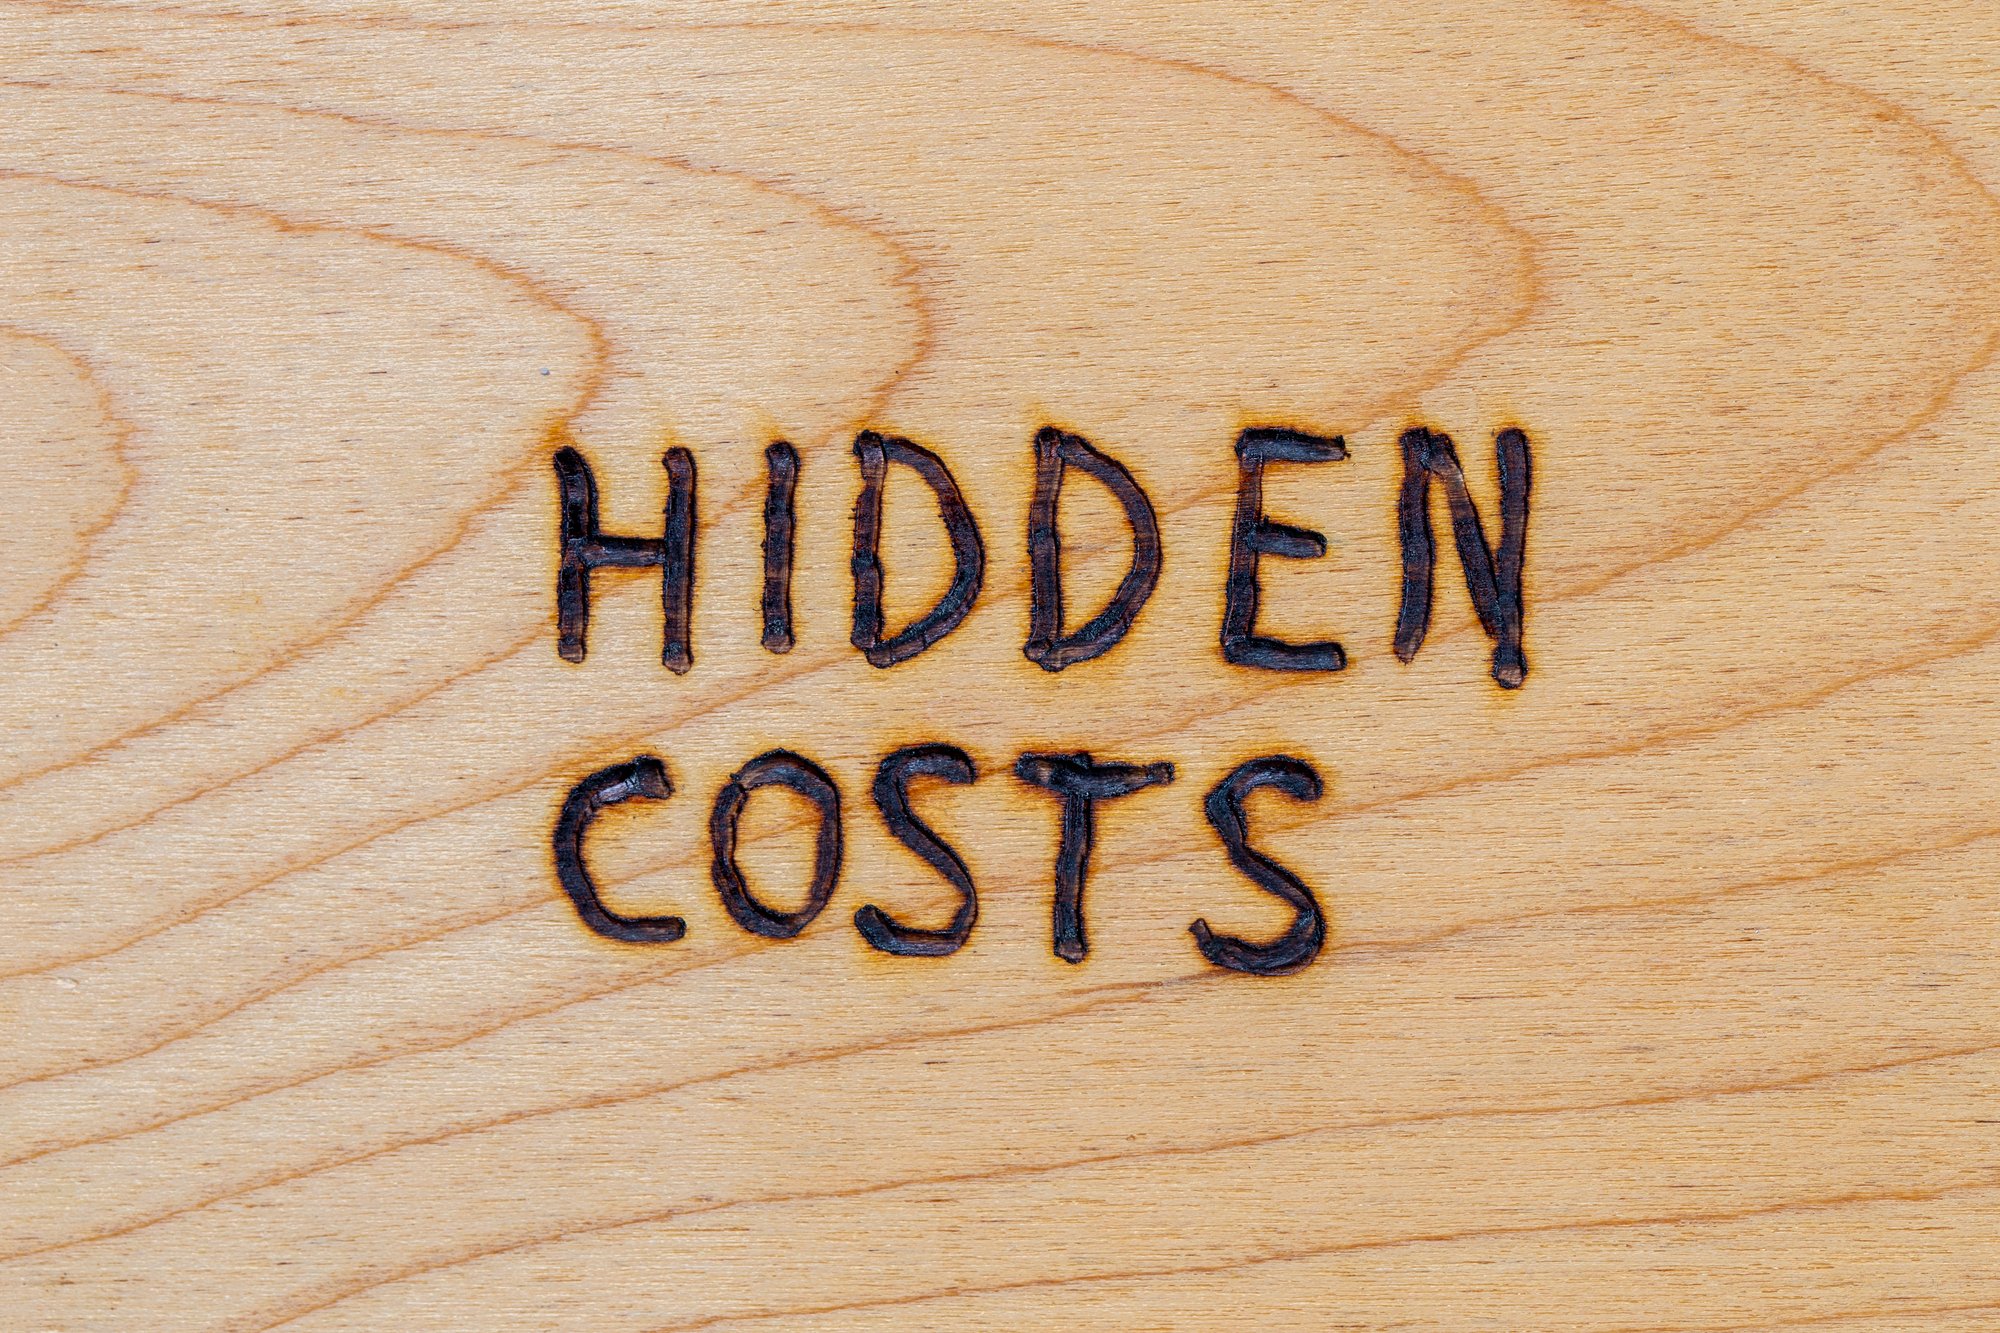 The words hidden costs handwritten with woodburner on flat wood surface - directly above flat lay view